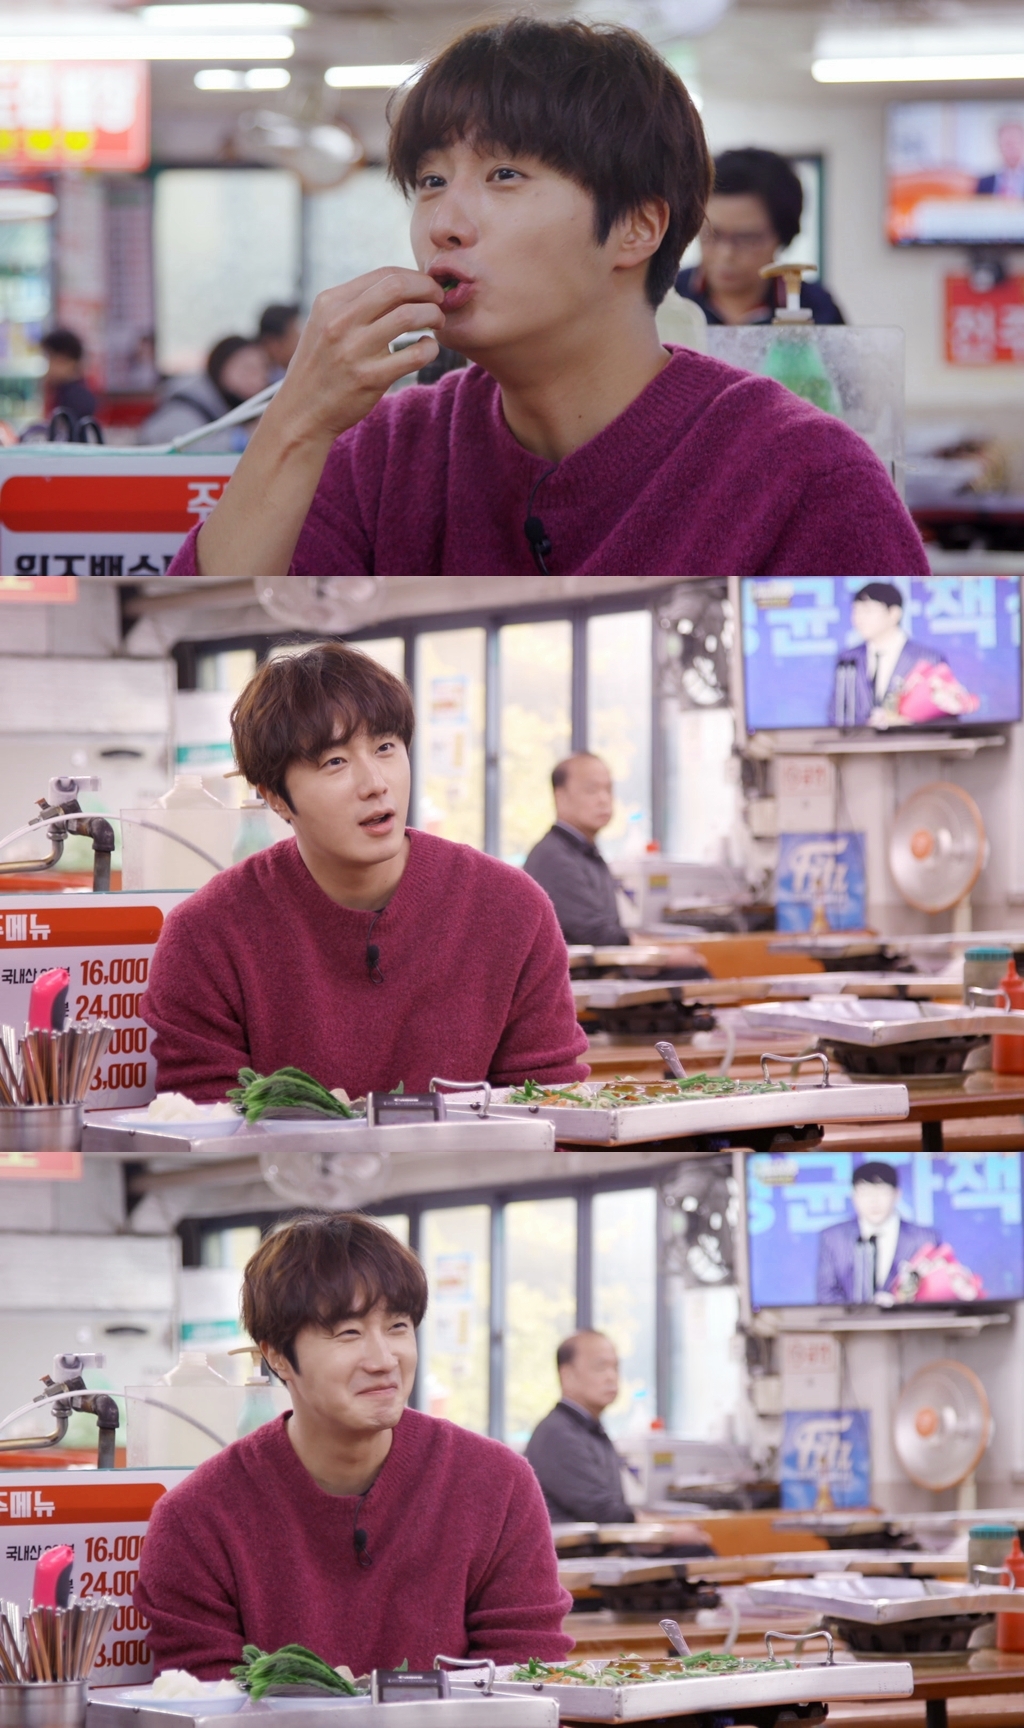 Seoul = = Stars Top Recipe at Fun-Staurant Jung Il-woo reveals memories with best friend Lee Min-hoKBS 2TV Stars Top Recipe at Fun-Staurant, which is broadcasted at 9:45 pm on the 17th, will reveal the menu development process of five-person Shef (Lee Kyung-gyu Lee Young-ja Jung Il-woo Lee Hye-sung) to find the fourth theme, Taste of Memories.Especially on this day, the memories of Jung Il-woo will be released as a teenager.In a recent recording, Jung Il-woo visited Sundaechon, Shinlim-dong, which he often attended during high school.Jung Il-woo, who was playing the storm sundae Mukbang as a nickname of Eat-woo, recalled memories of high school days and told about his meeting with Friend Lee Min-ho, who has been a close friend until now.Jung Il-woo said, (When I was a child) I went to Lee Min-ho school because there was a festival, and then a glowing child walked from afar, he said. I thought, What is he?Lee Min-ho has been handsome since he was a real kid, he said.Jung Il-woo then showed off his extraordinary friendship, saying, I have been dreaming of Actor since I was a child.The cast of Stars Top Recipe at Fun-Staurant who heard memories of Jung Il-woo and Lee Min-ho said, Who was more popular with girls?Jung Il-woo is the back door of responding with a witty answer.